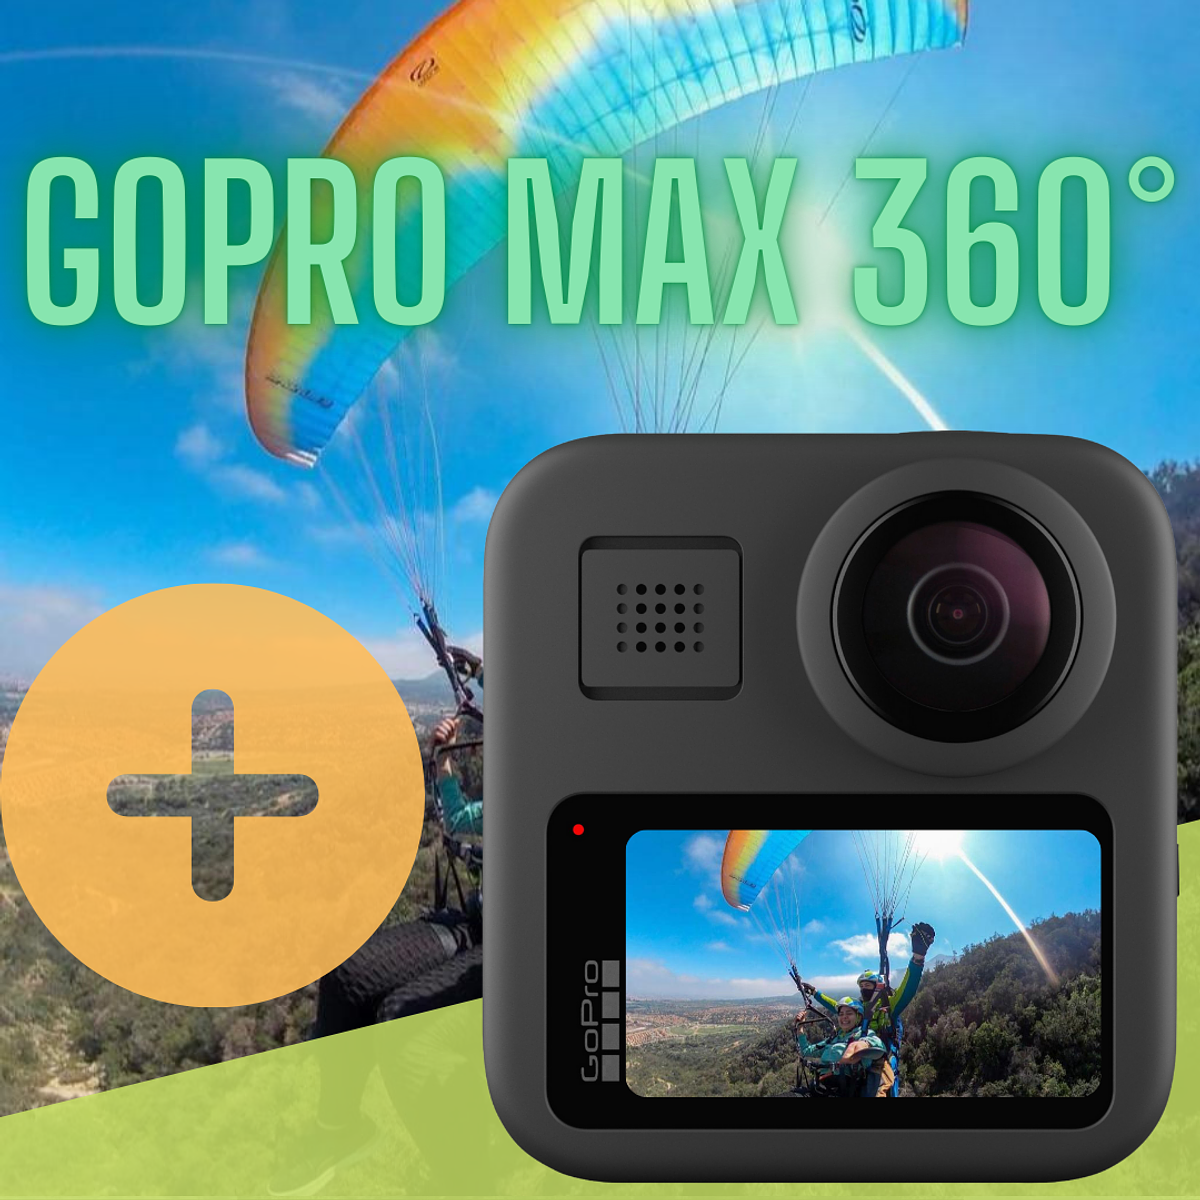 Pictures and video Gopro Max 360°